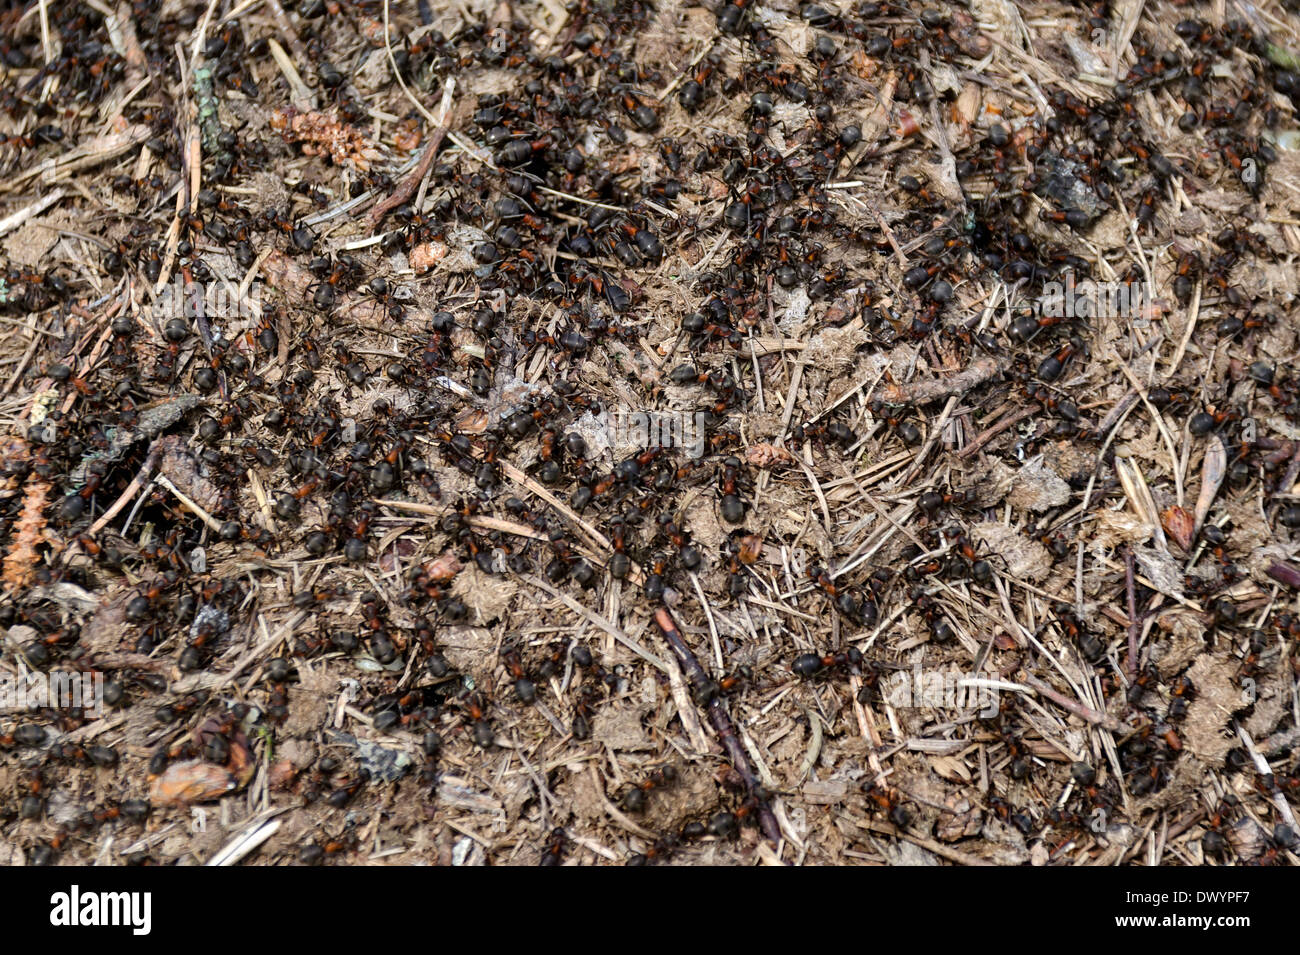 Anthill into the earth among soil and plants, ant house Stock Photo